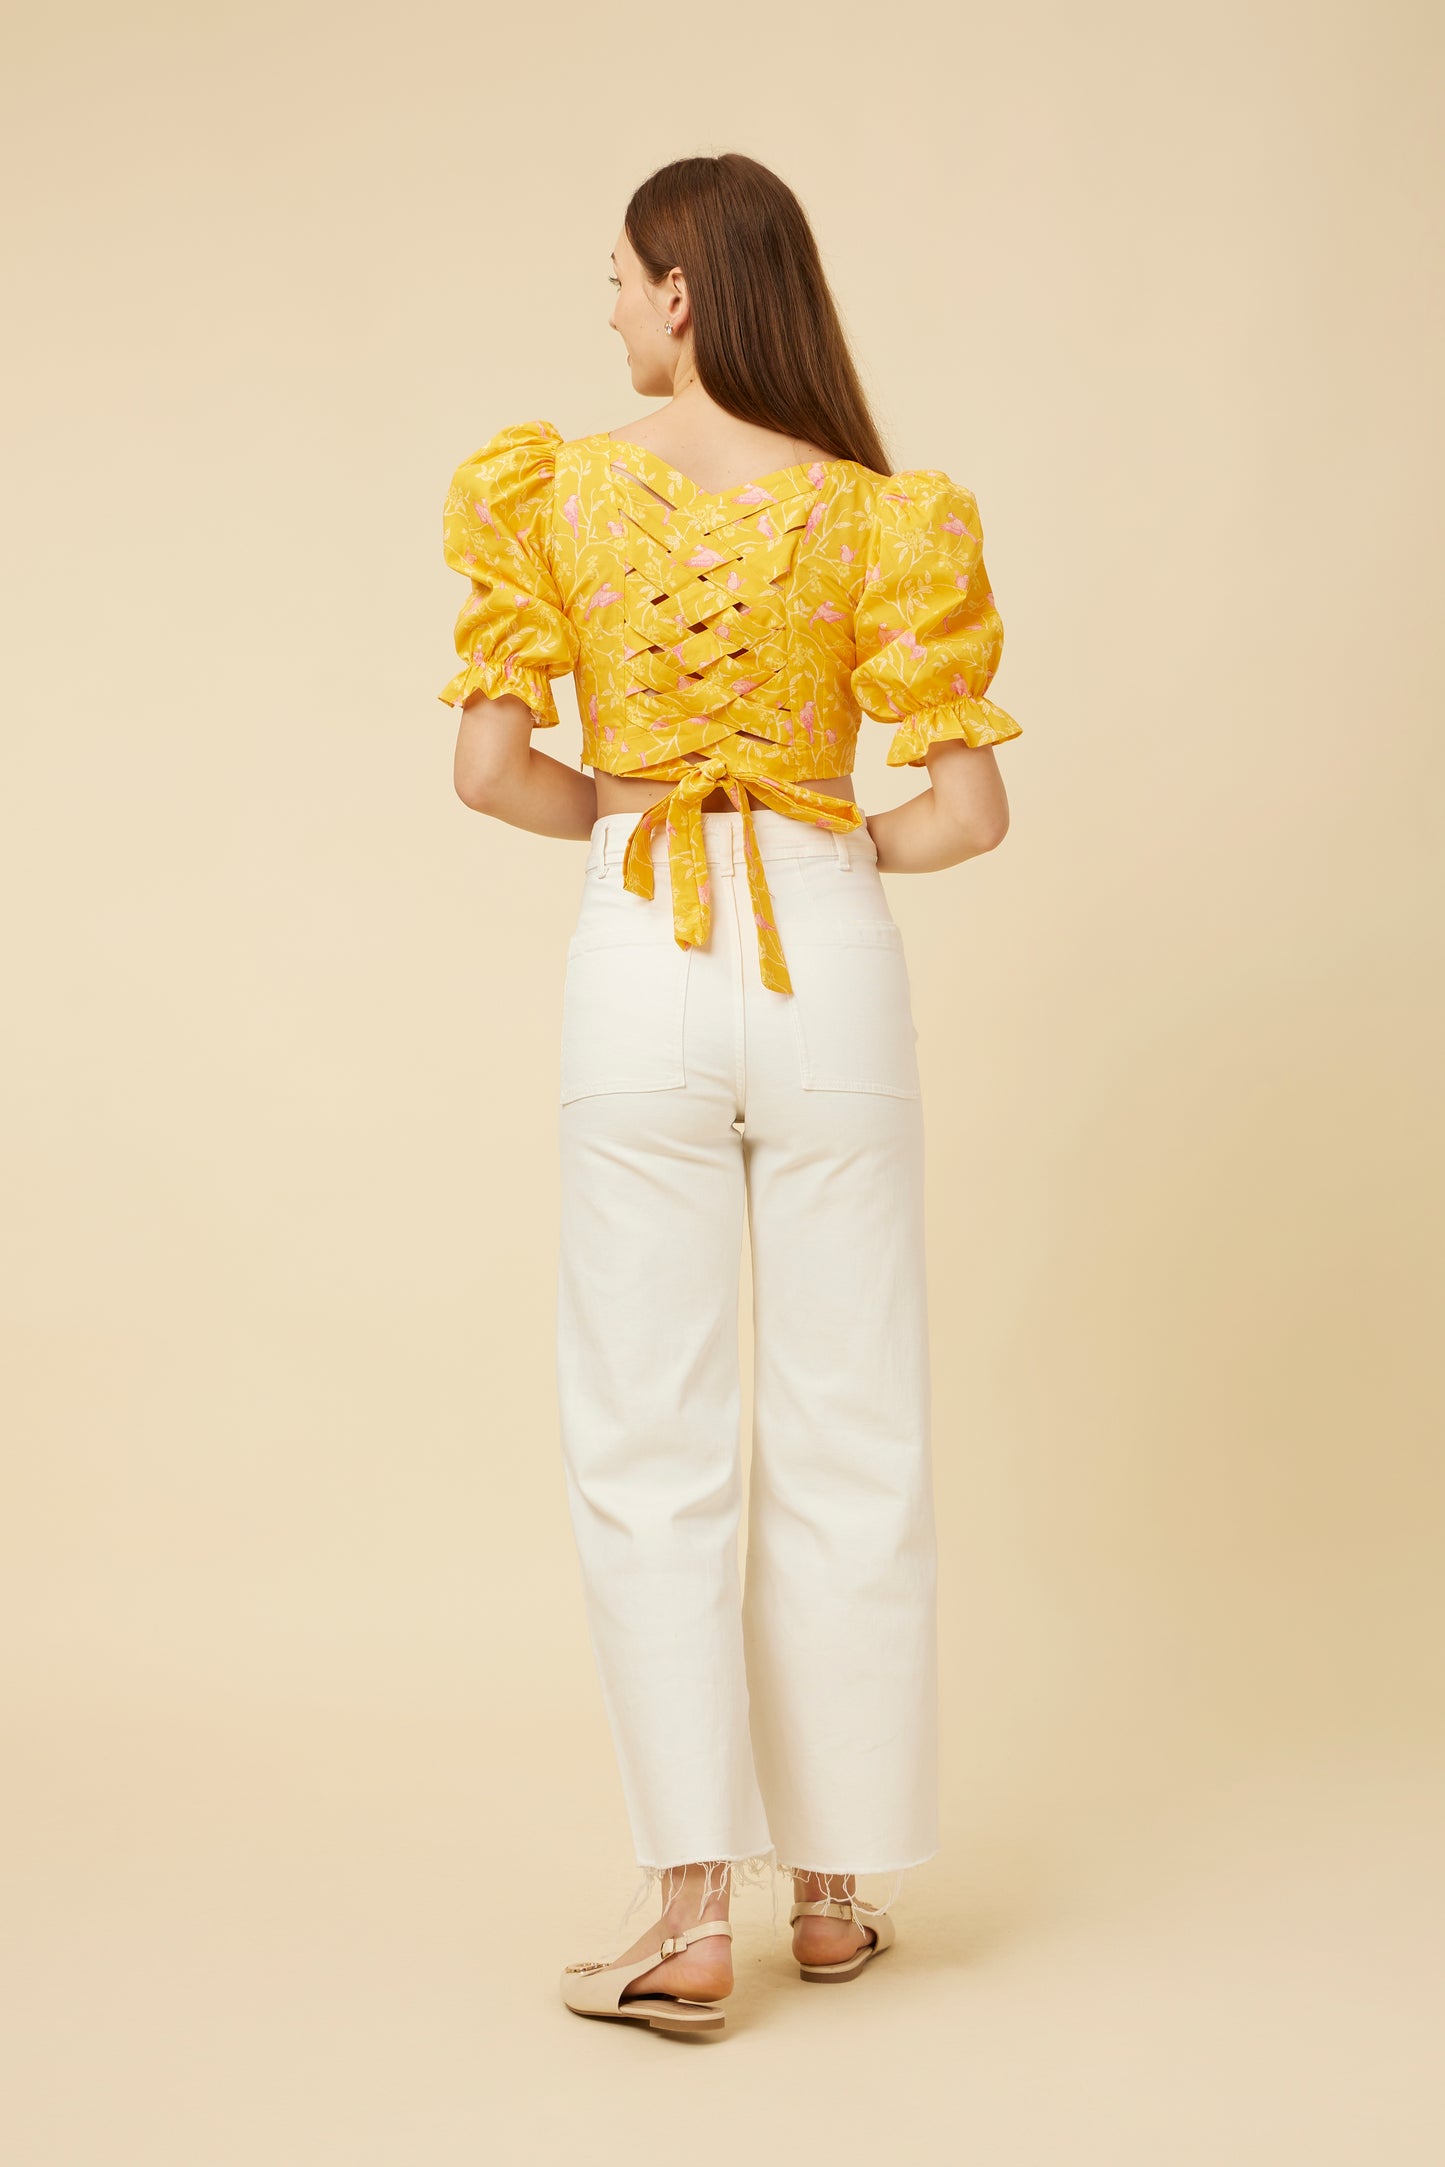 Rear view of the Peela Sunshine Crop Top displaying the criss-cross and tie-back details, paired with high-waisted white pants on a model